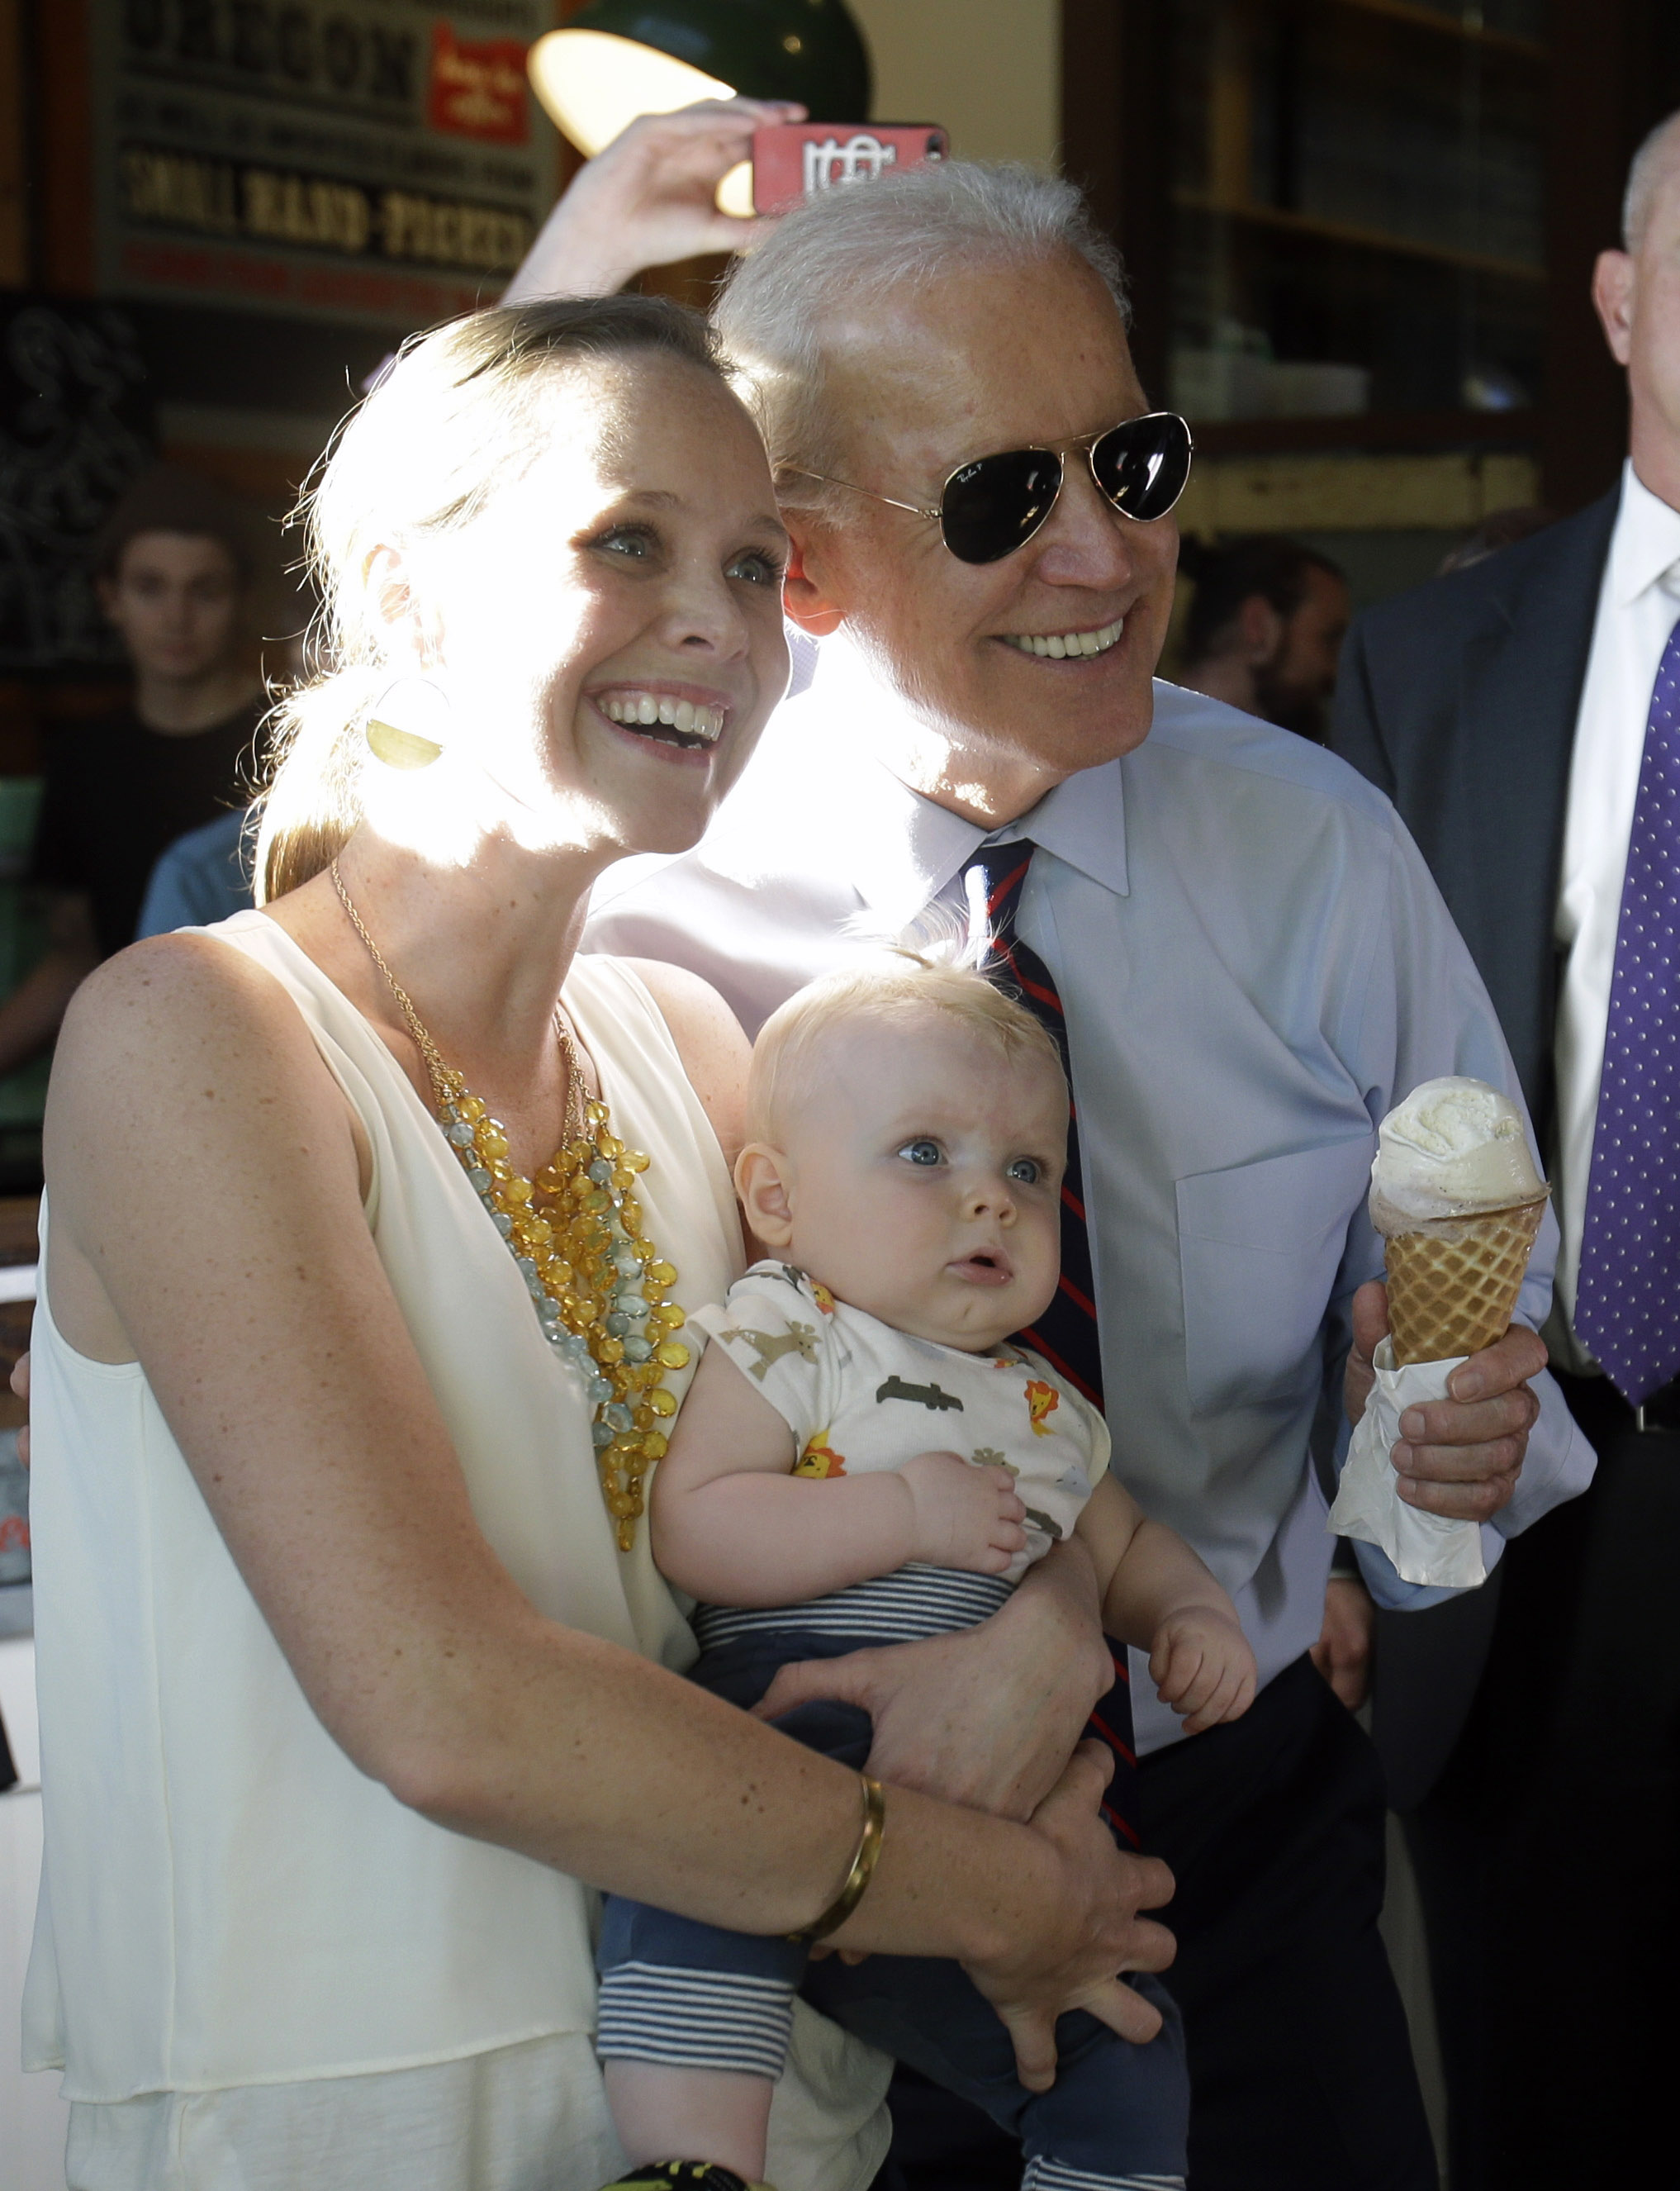 Vice President Joe Biden holds an ice cream cone as he poses for a photo with Hope Lobkowizc and her son, Owen, at an ice cream parlor after a campaign rally in Portland, Ore., Wednesday, Oct. 8, 2014. (Don Ryan—AP)